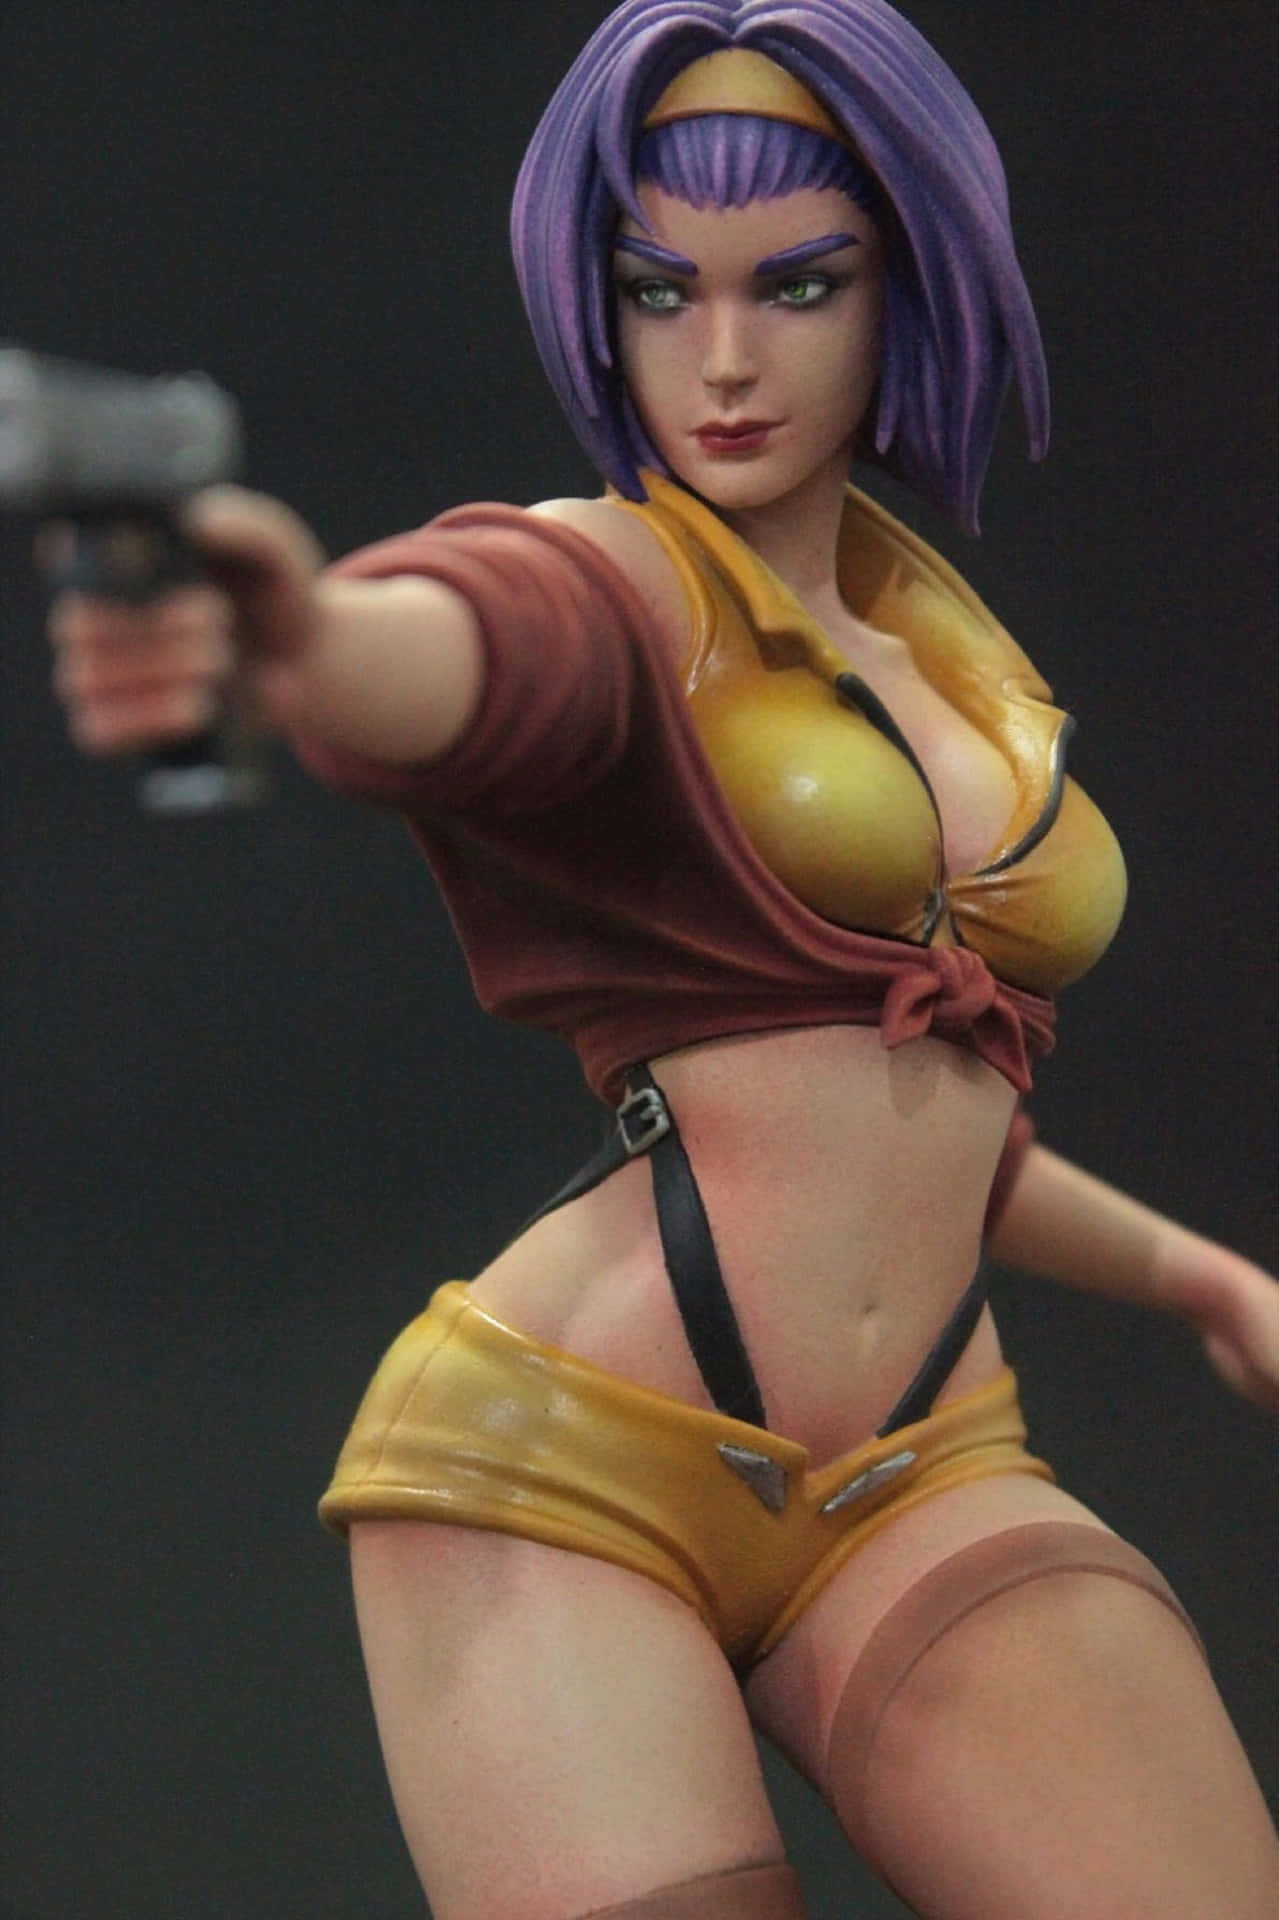 Faye Valentine posing with her iconic outfit in a sleek digital art Wallpaper